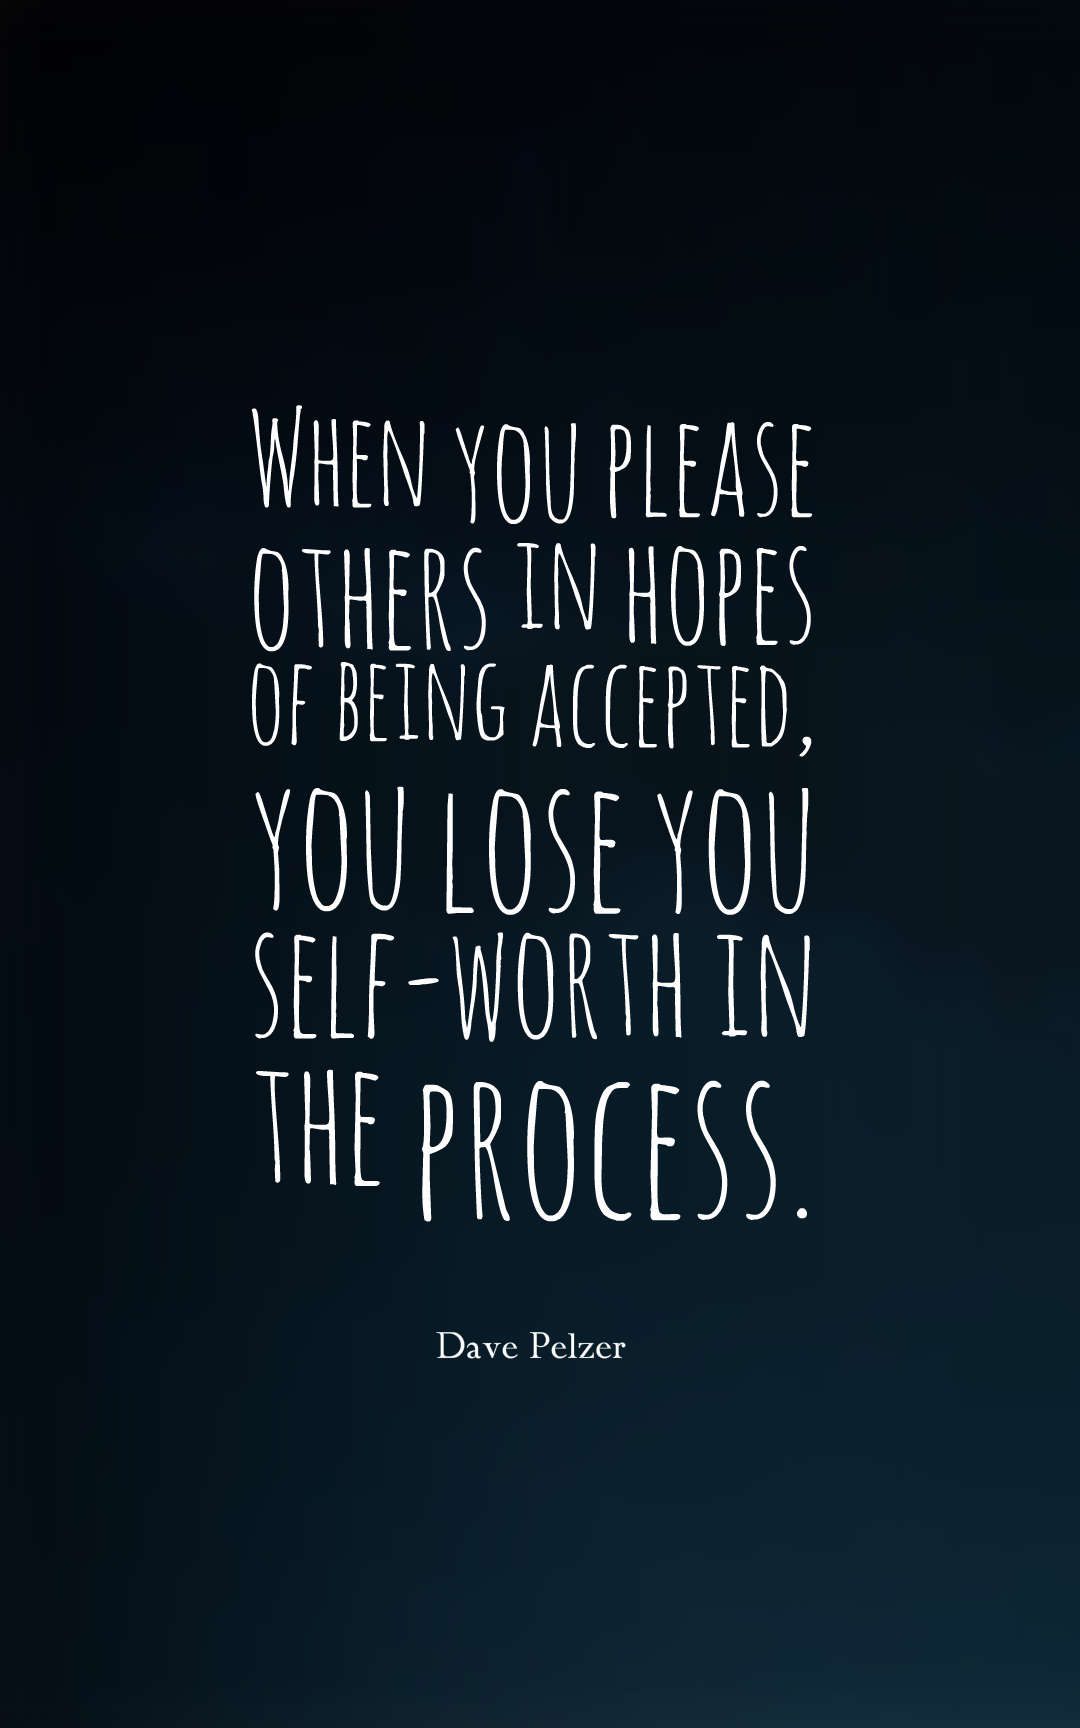 When you please others in hopes of being accepted, you lose your self-worth in the process.